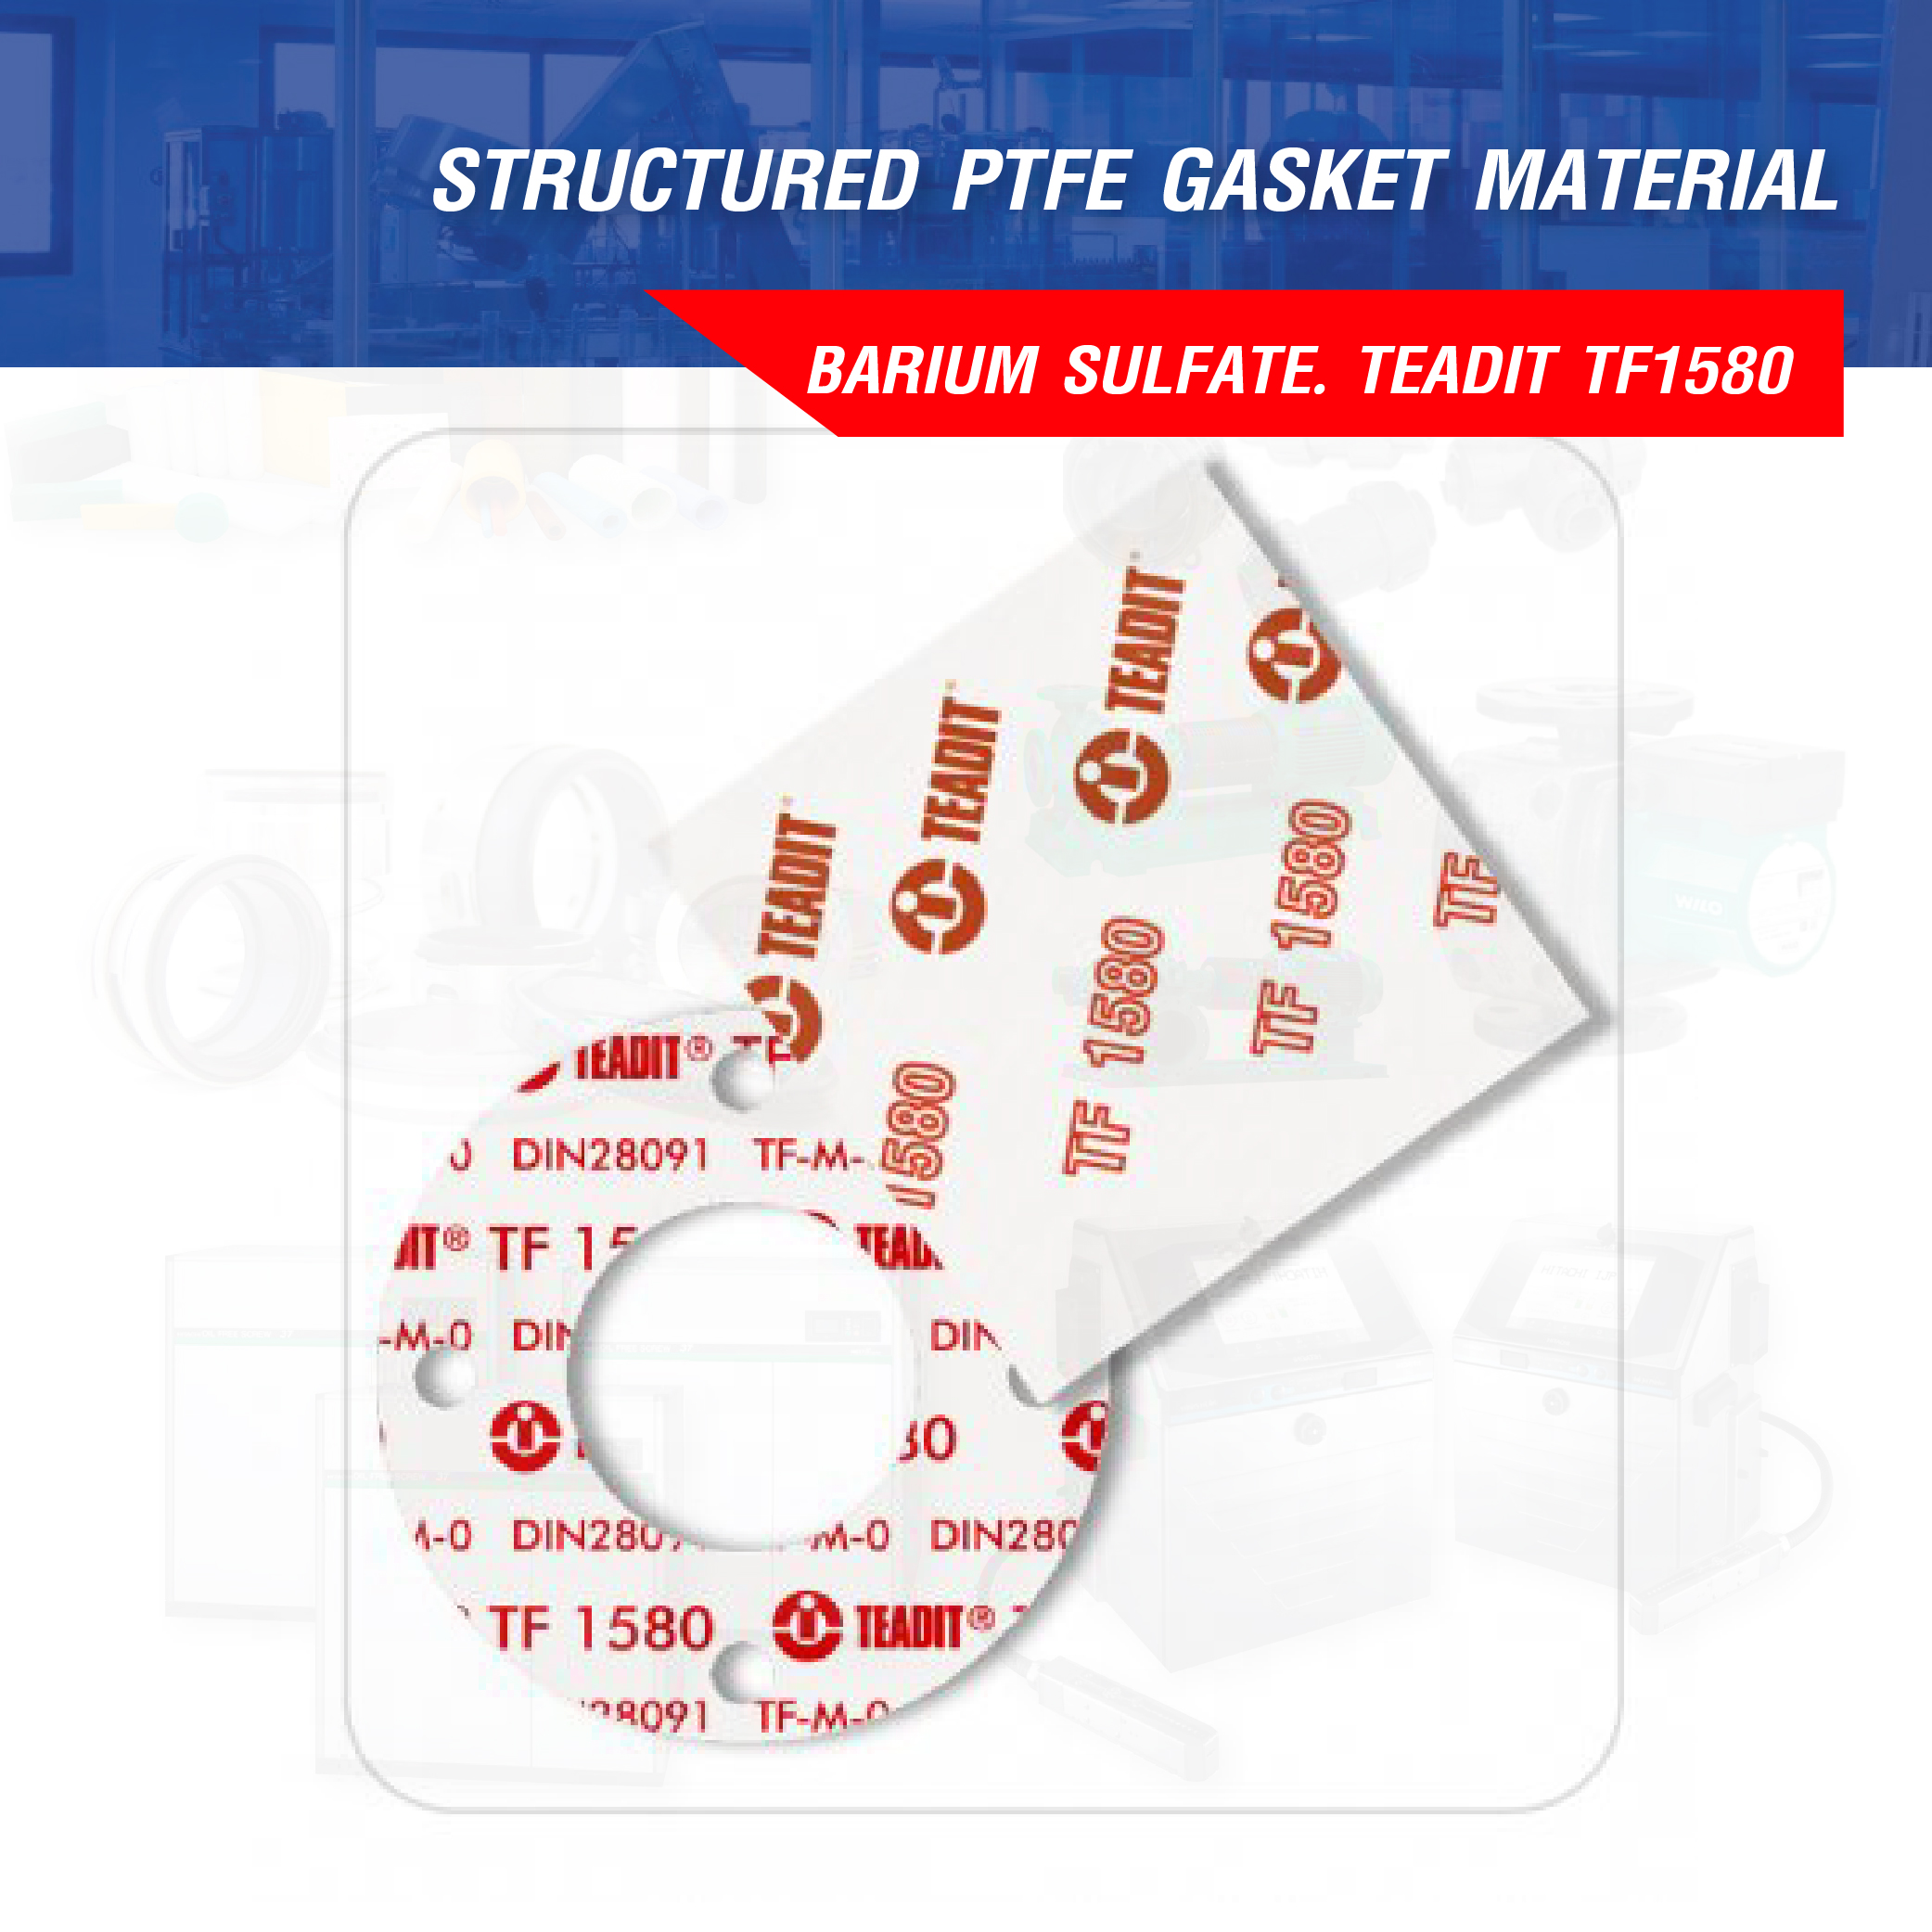 STRUCTURED PTFE GASKET MATERIAL